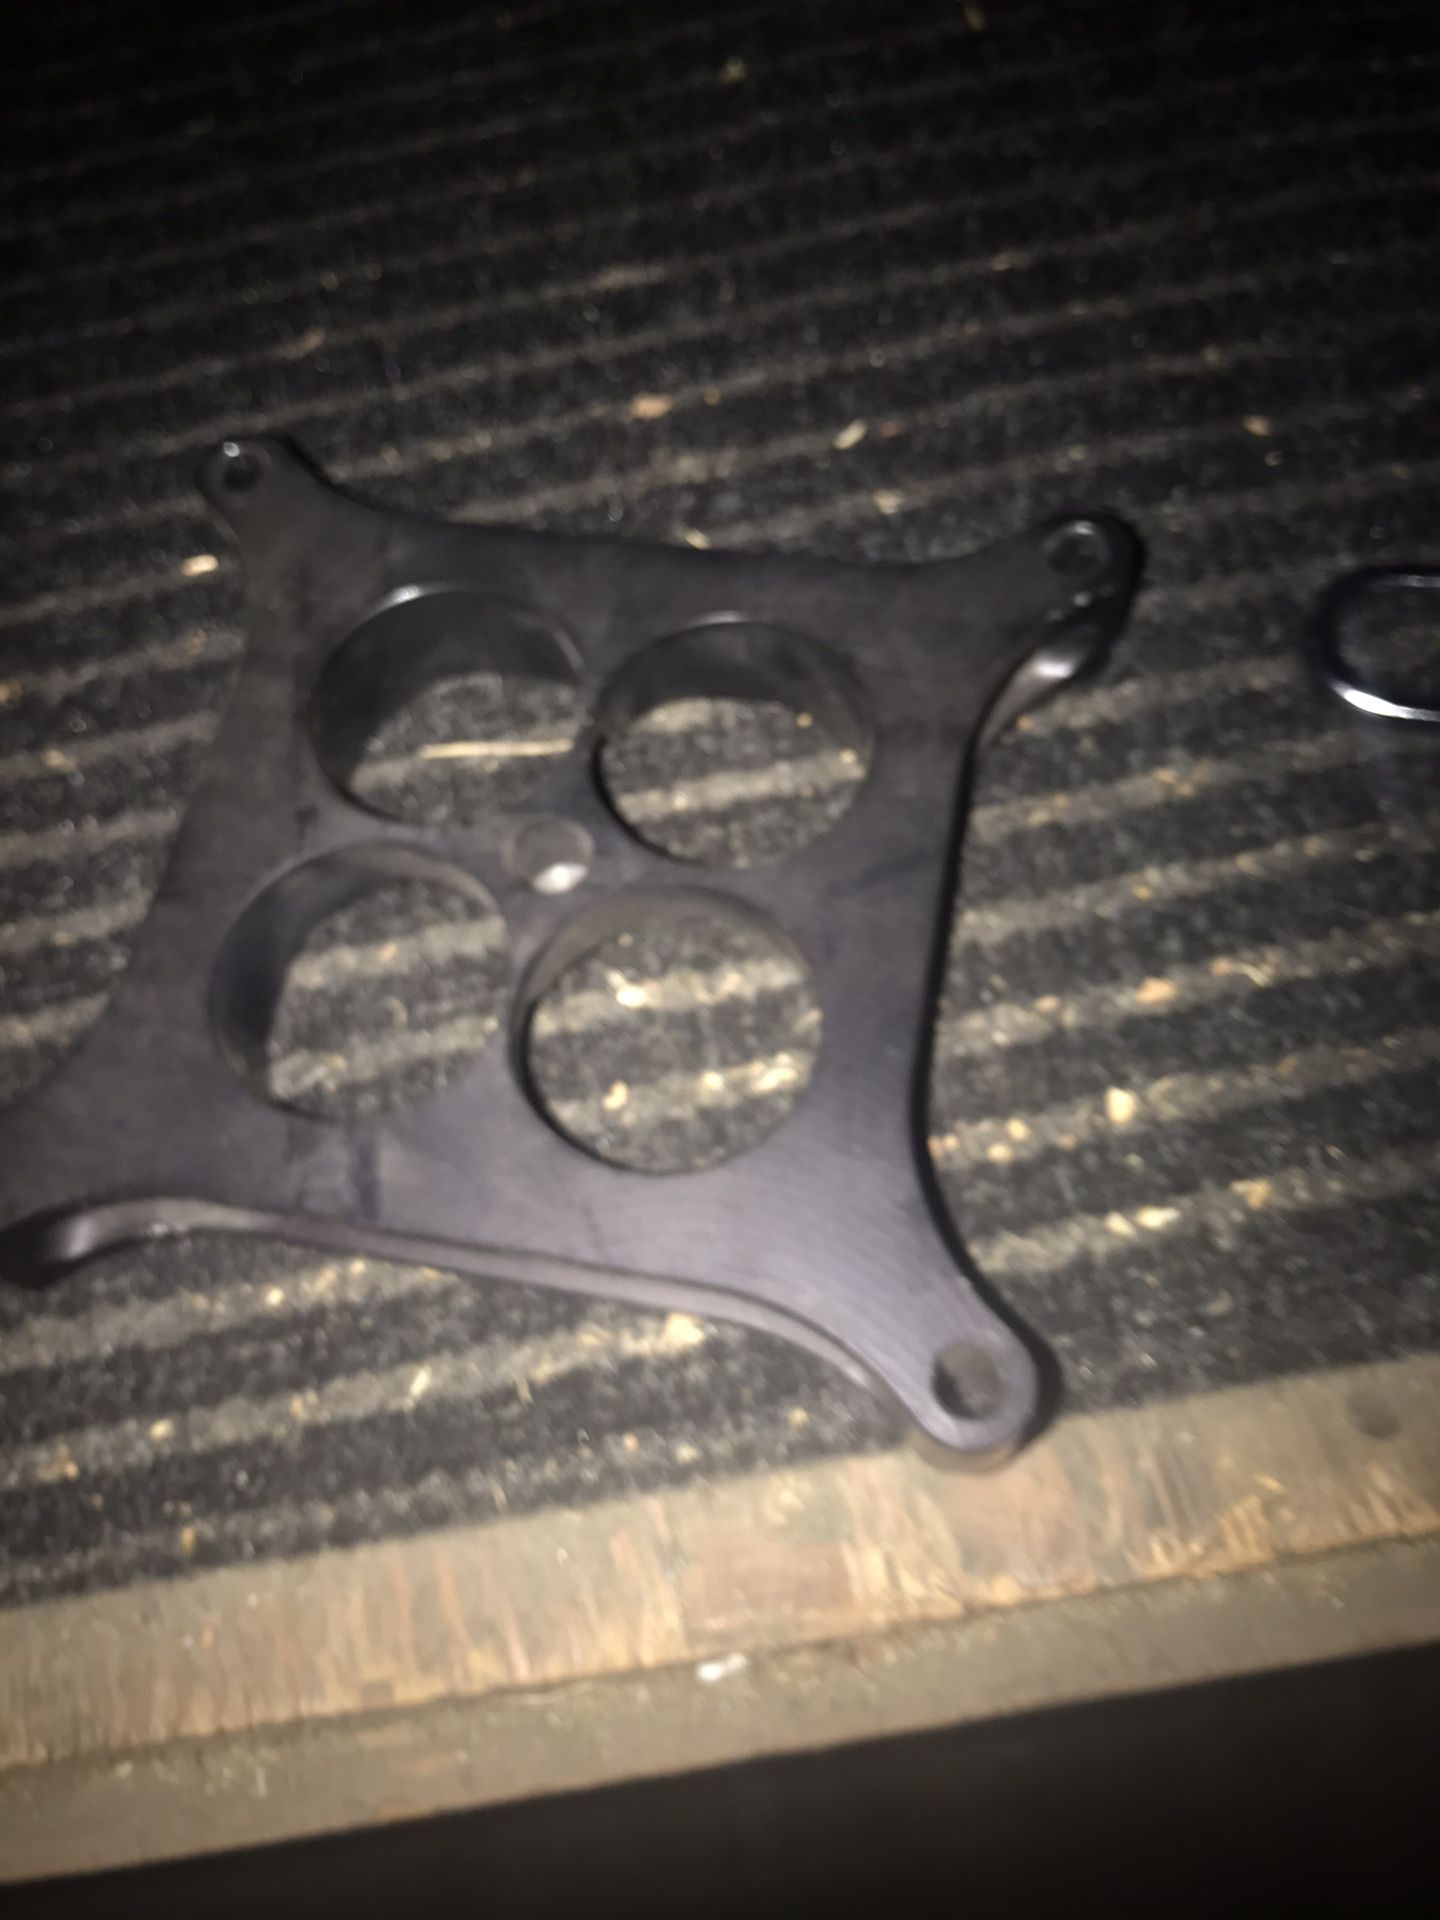 Wilson manifolds carb spacer